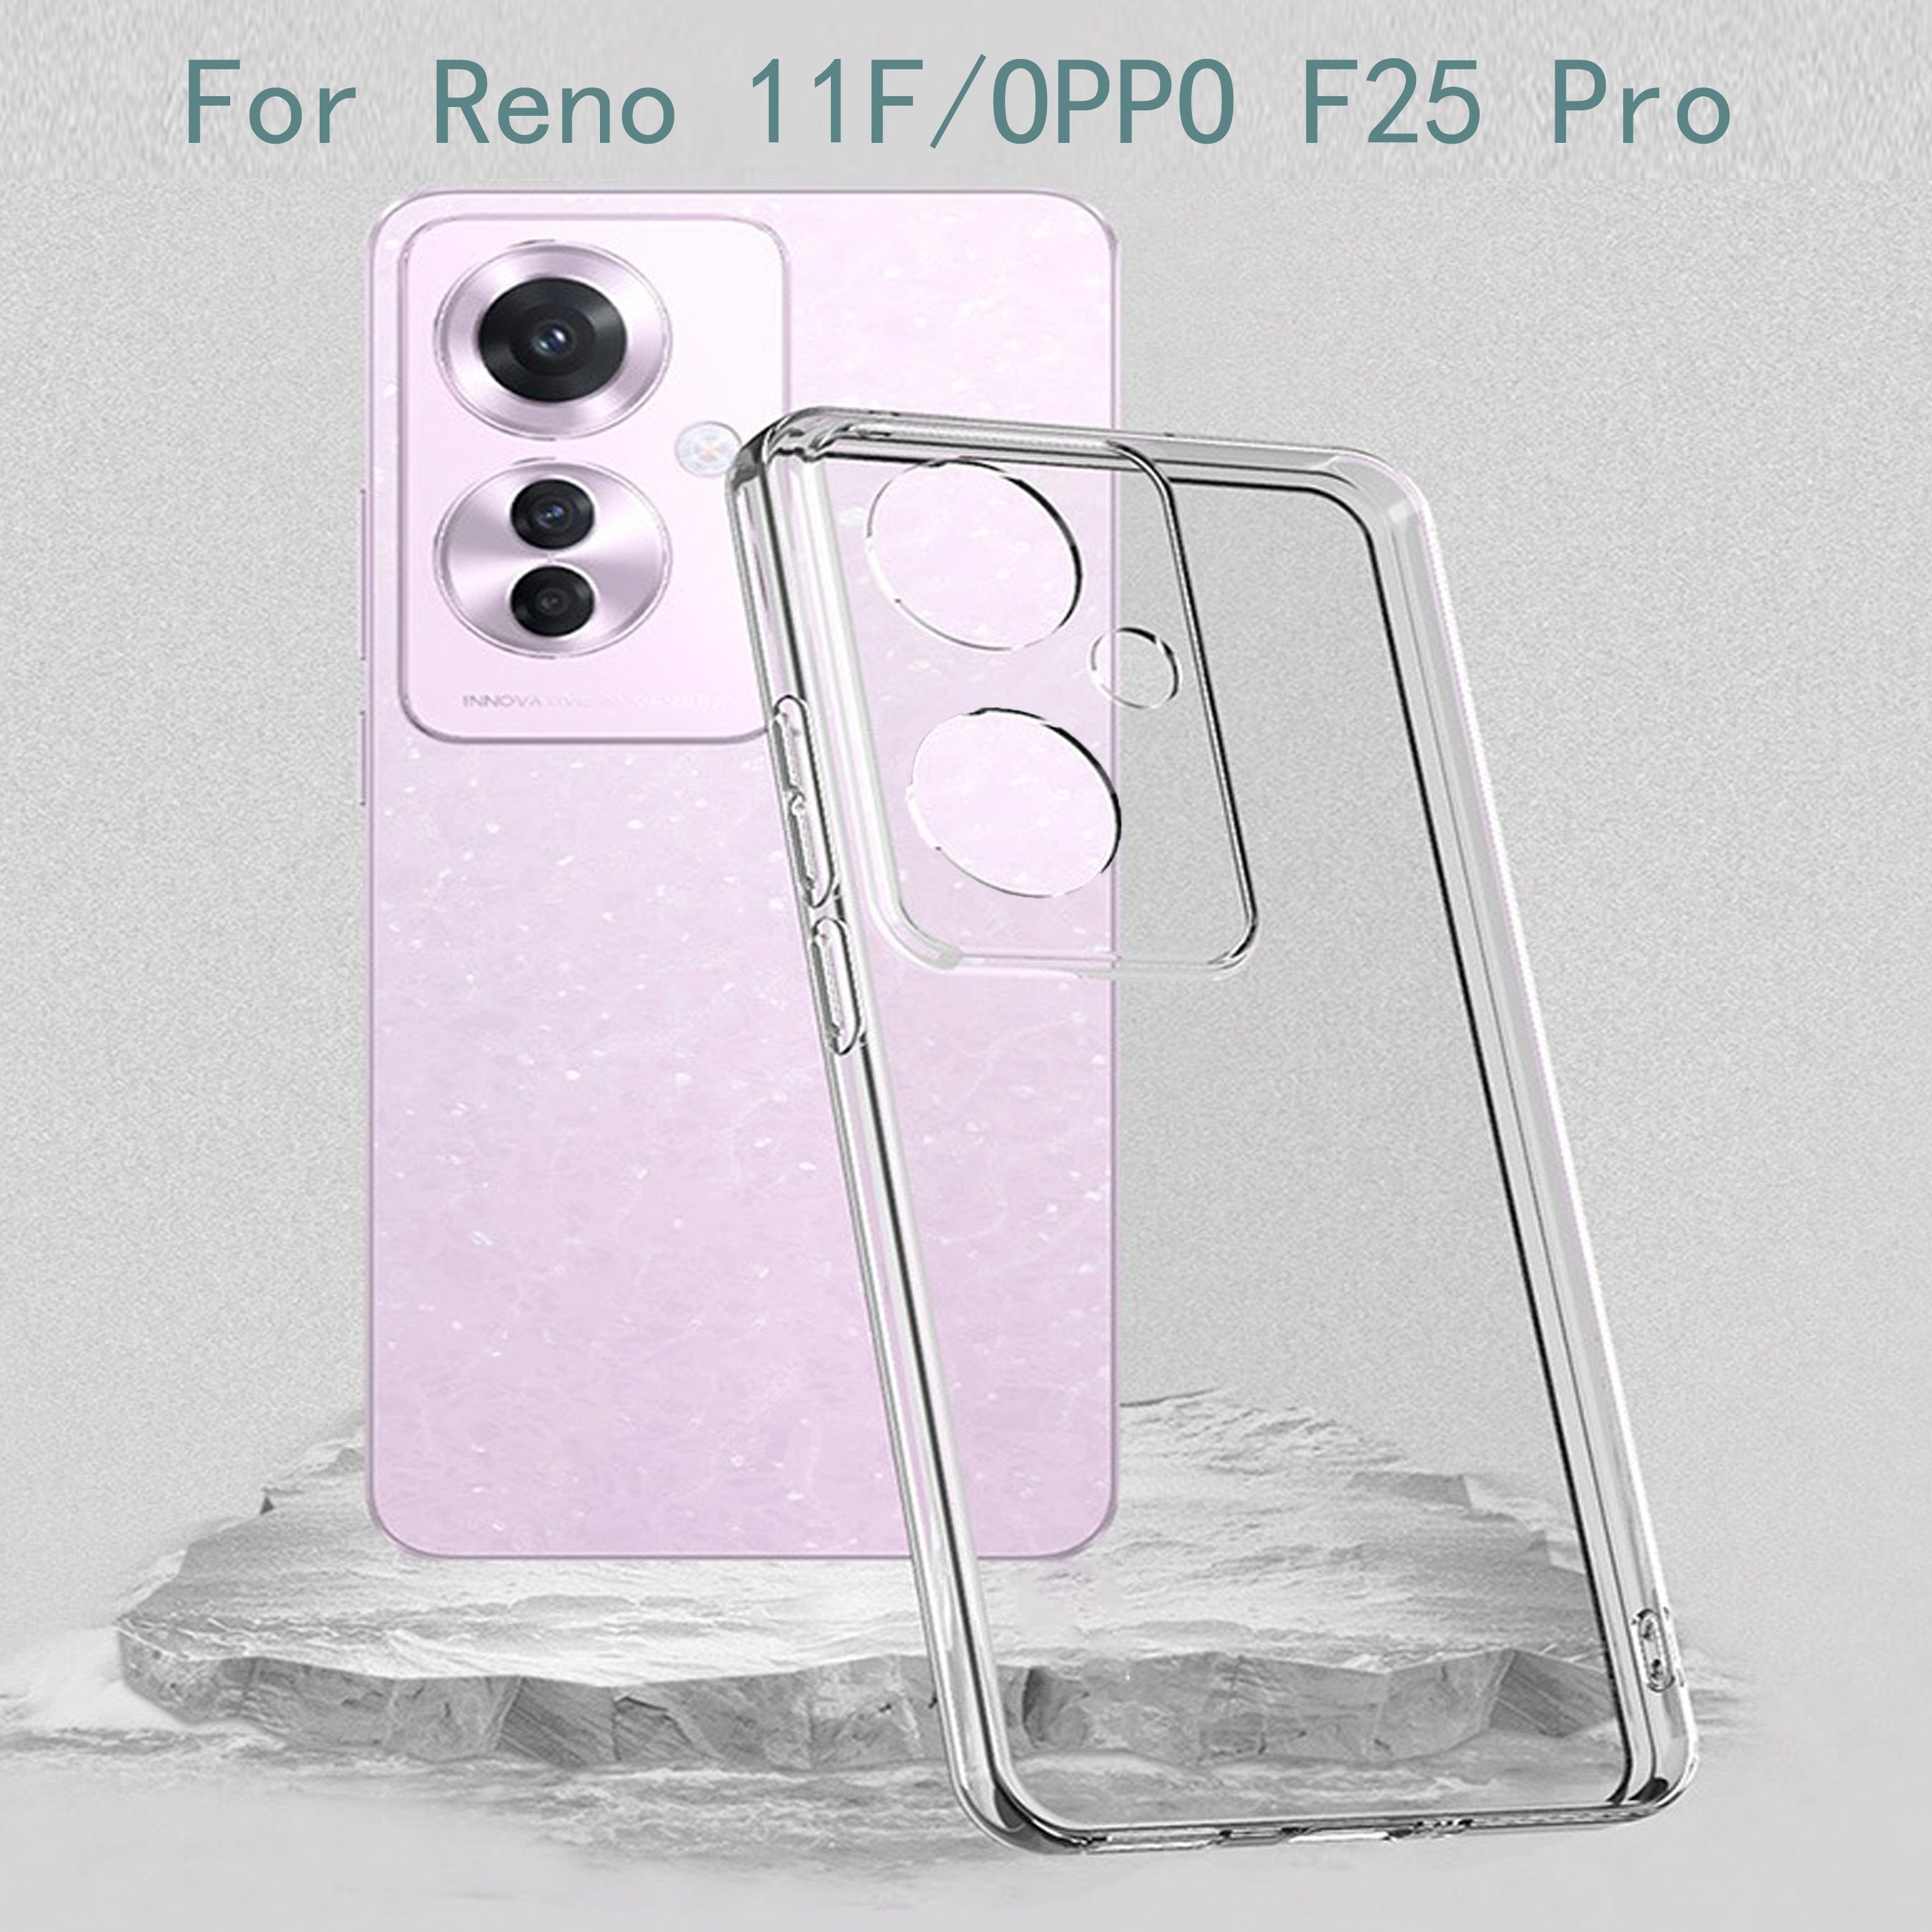 

seamless Fit" Ultra-slim Transparent Tpu Case For Oppo Reno 11f & F25 Pro - Durable, Soft Protective Cover